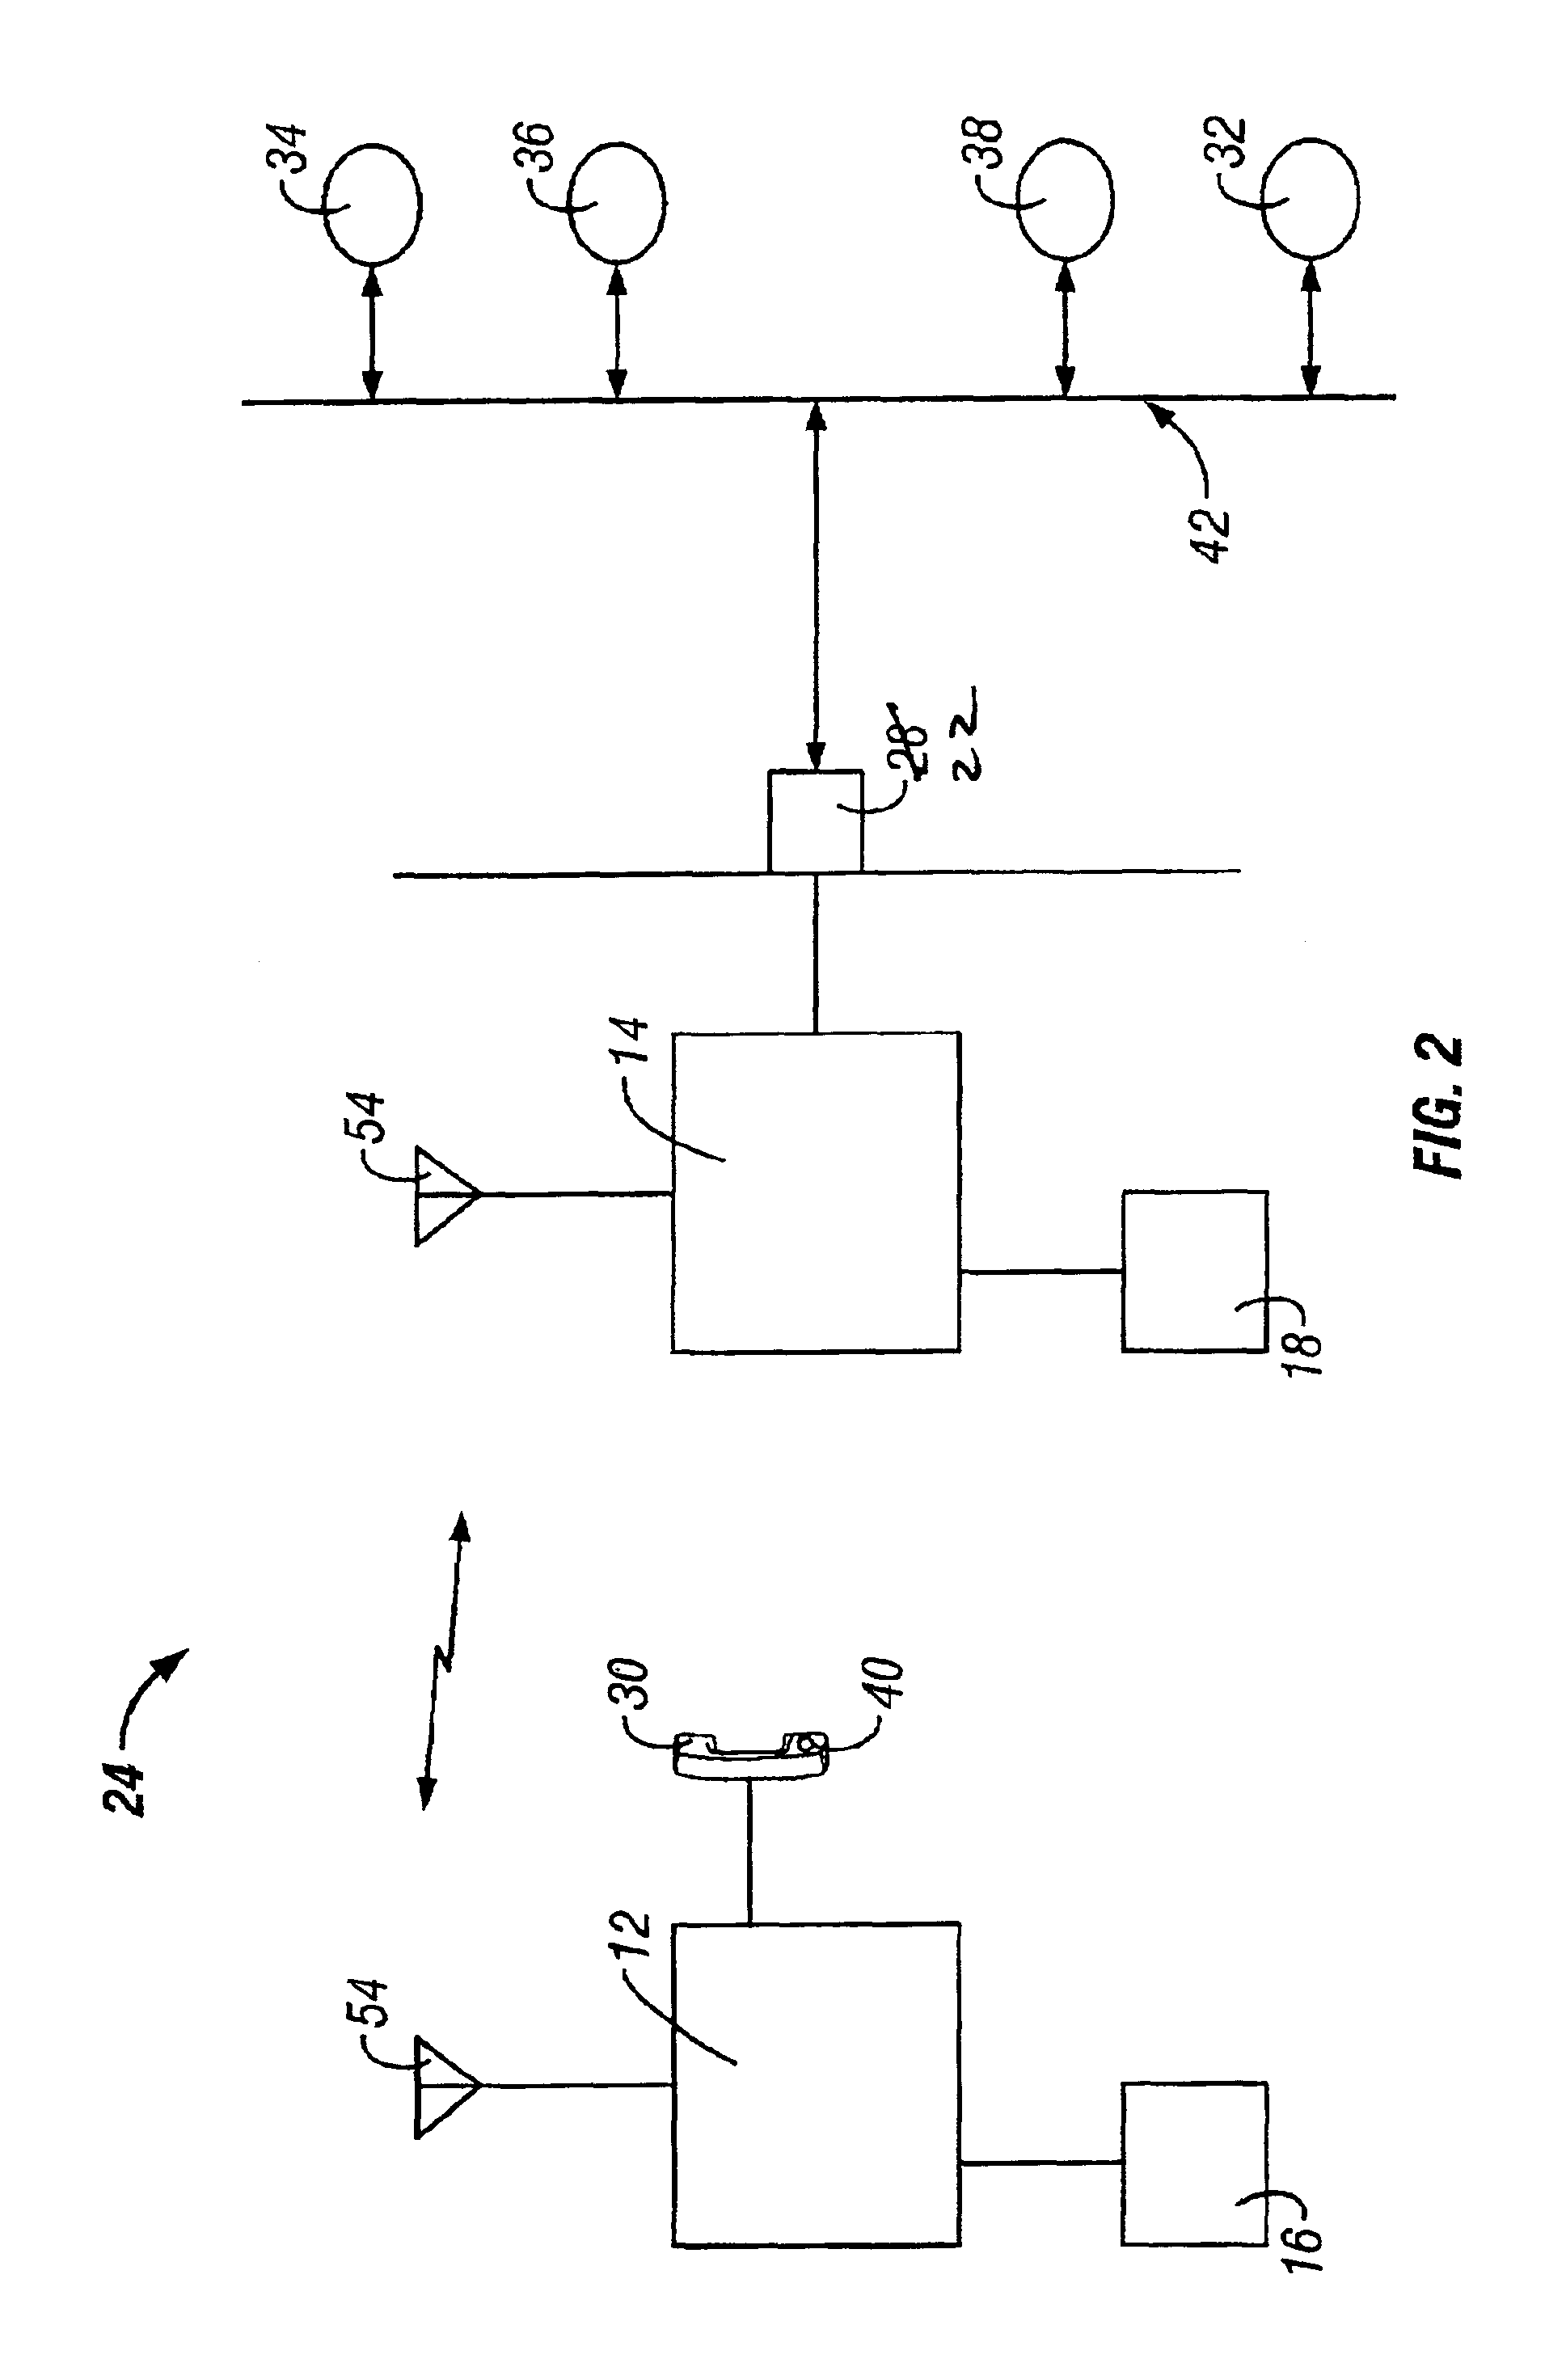 Method and apparatus for providing a wireless aircraft interphone system